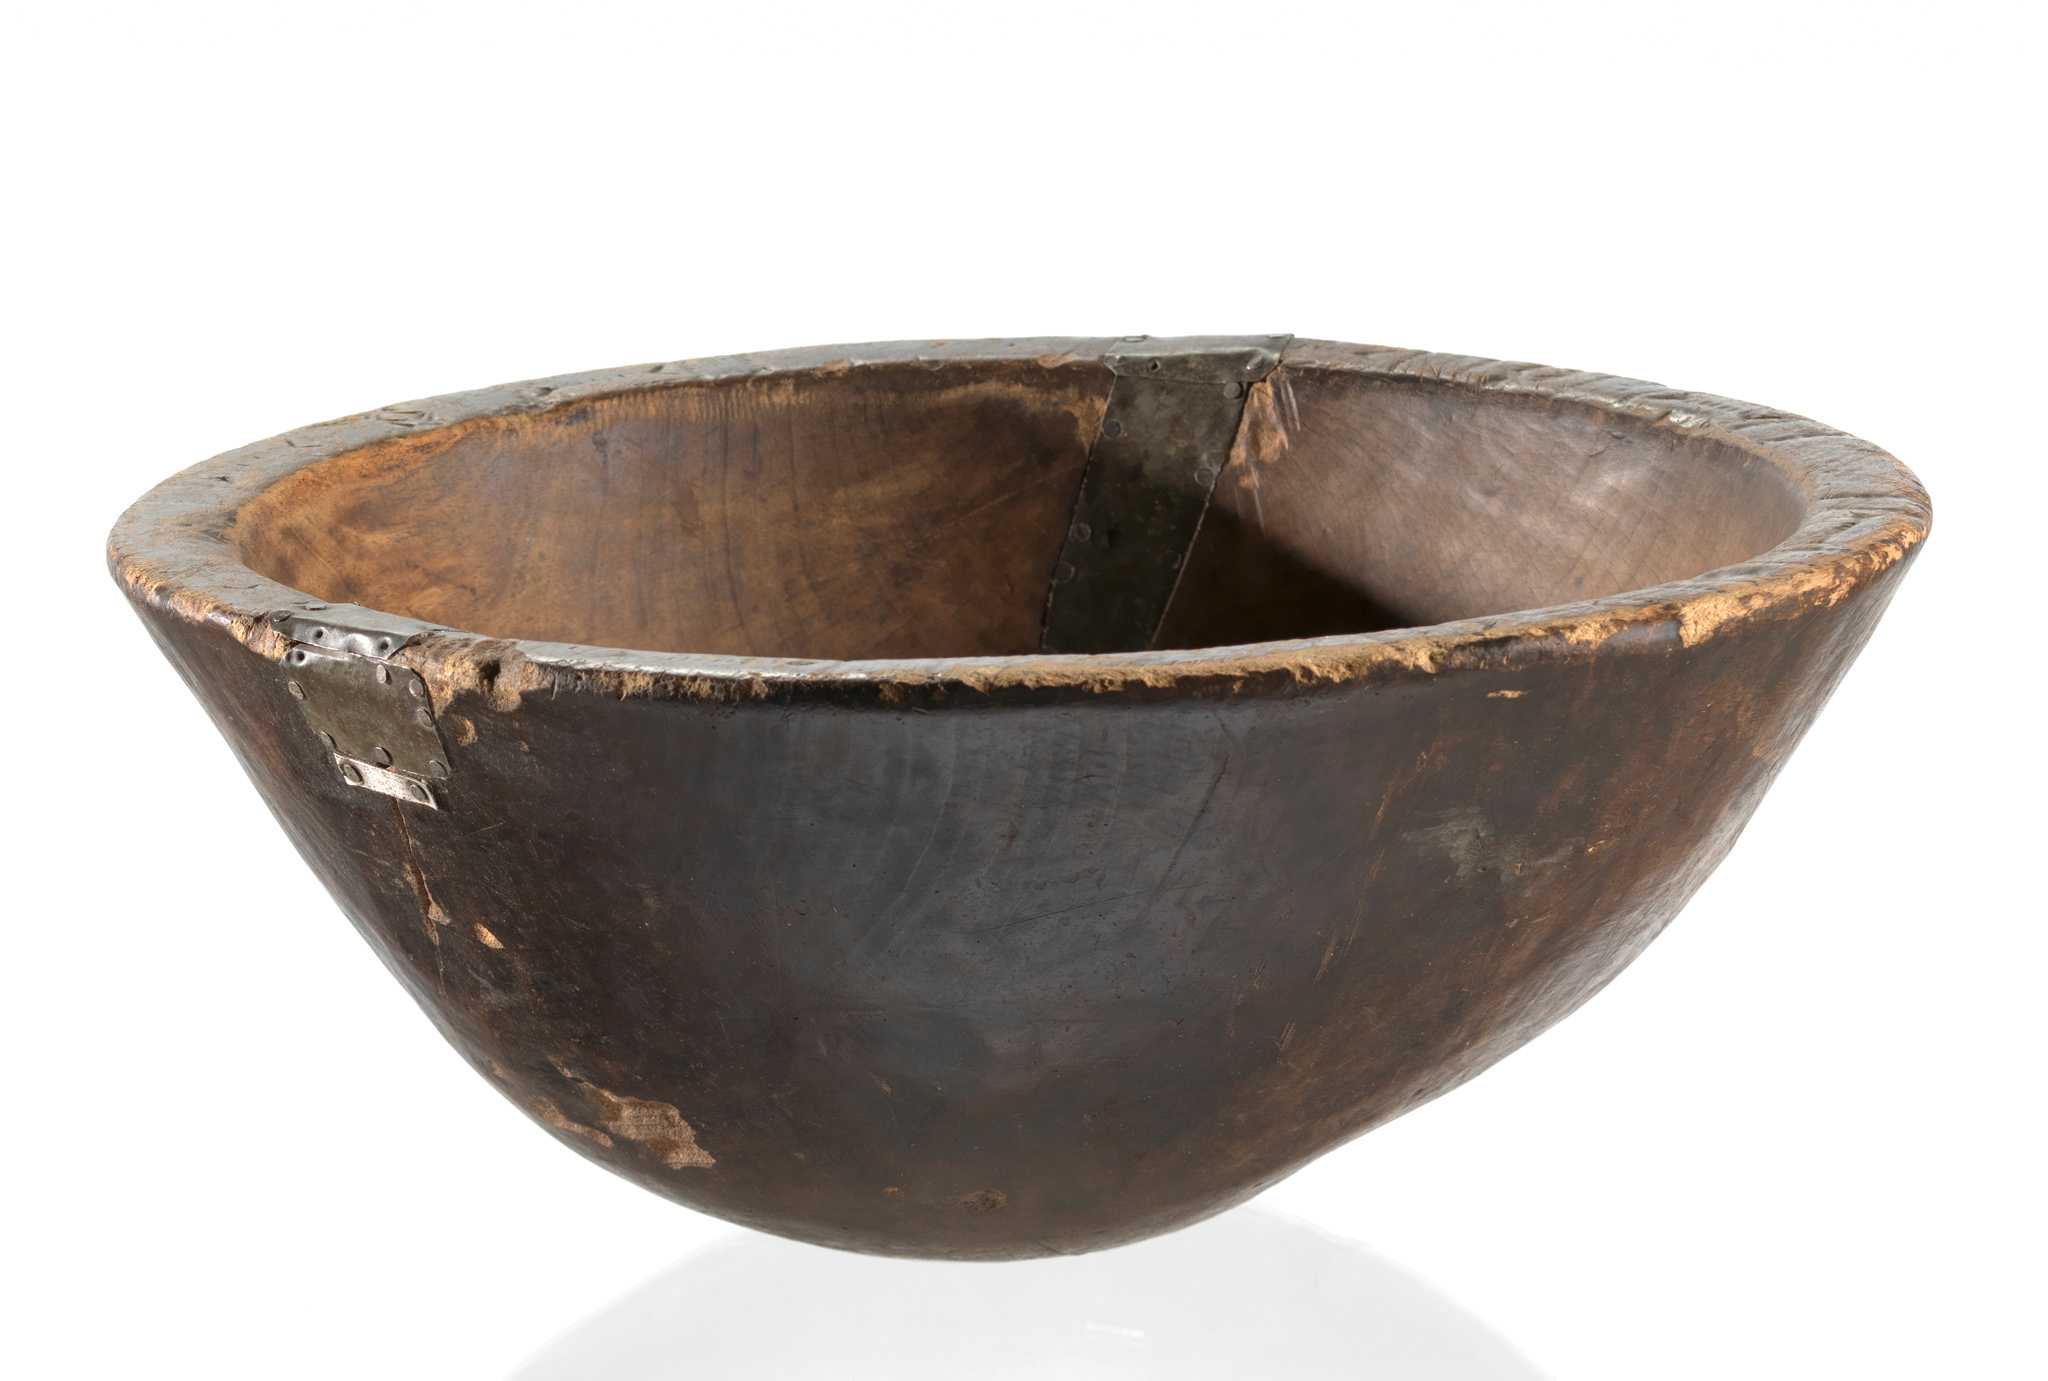 A large wooden bowl with an uneven shape and a rounded bottom. The lip is decorated with incised Adinkra symbols. Formed metal pieces were nailed over 2 separate cracks, acting as "patches." There is surface wear throughout, particularly on the bottom and around the lip.